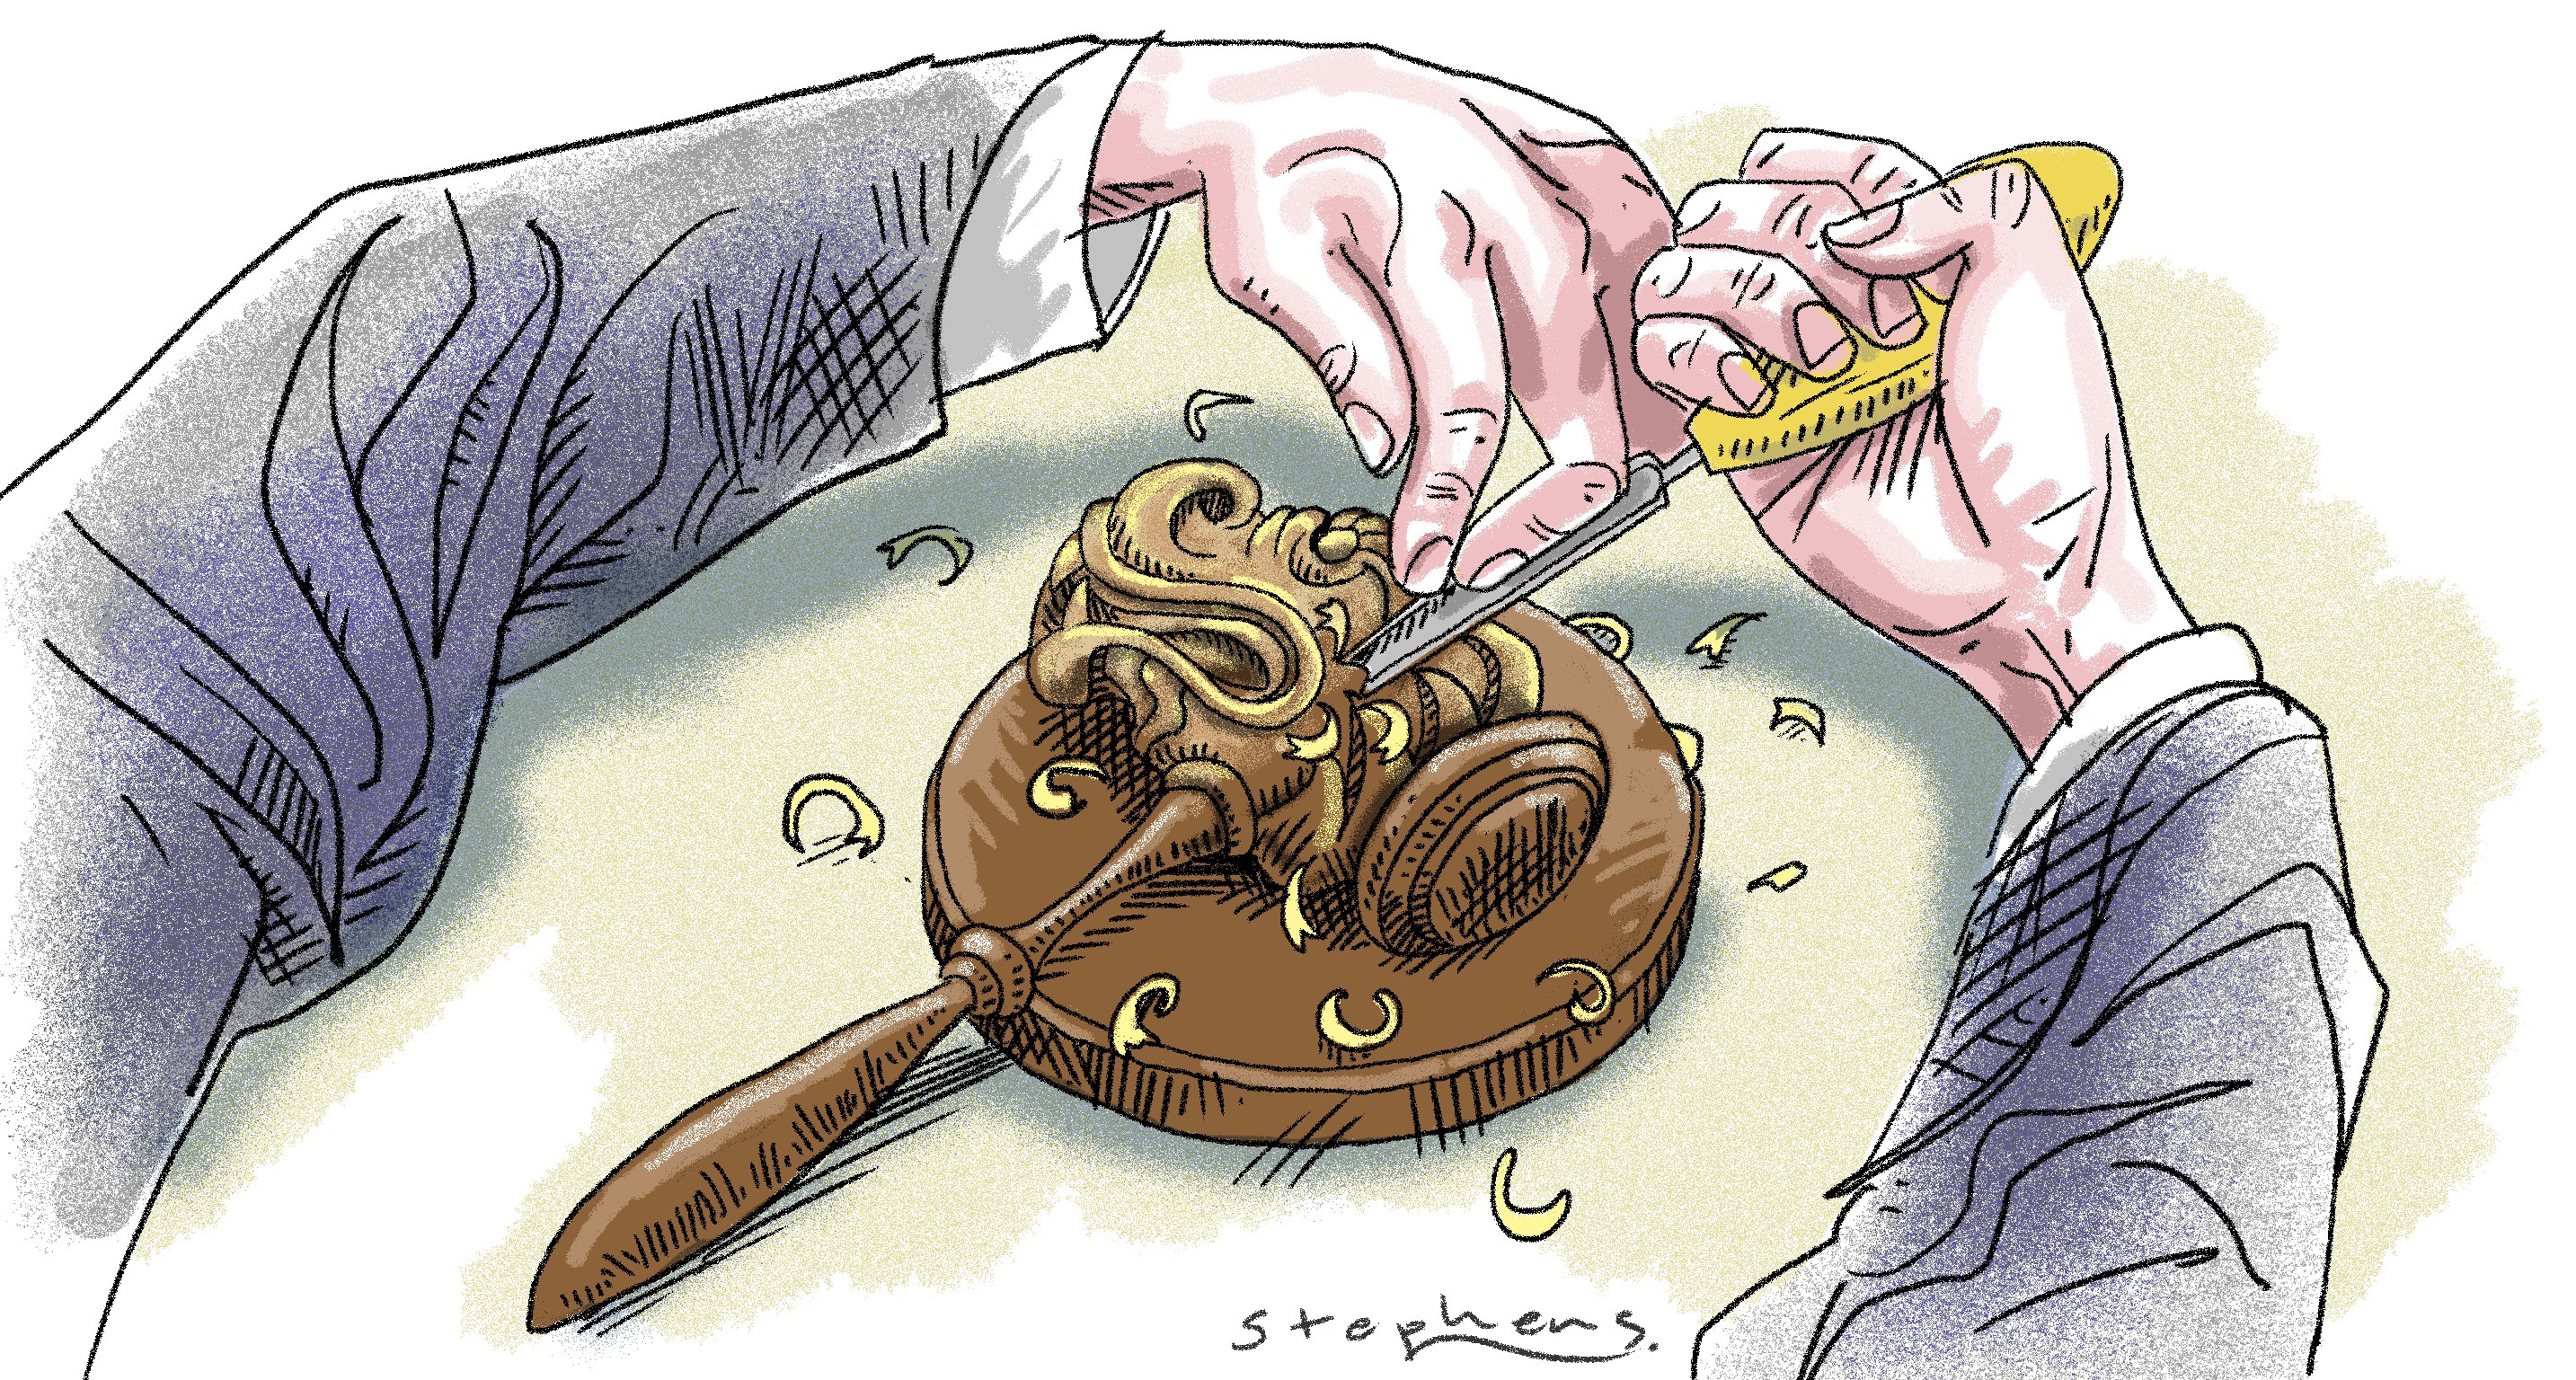 Since the change of sovereignty, the common law system of Hong Kong and the characteristics of its legal system have been undergoing a process of “nationalisation”. Illustration: Craig Stephens